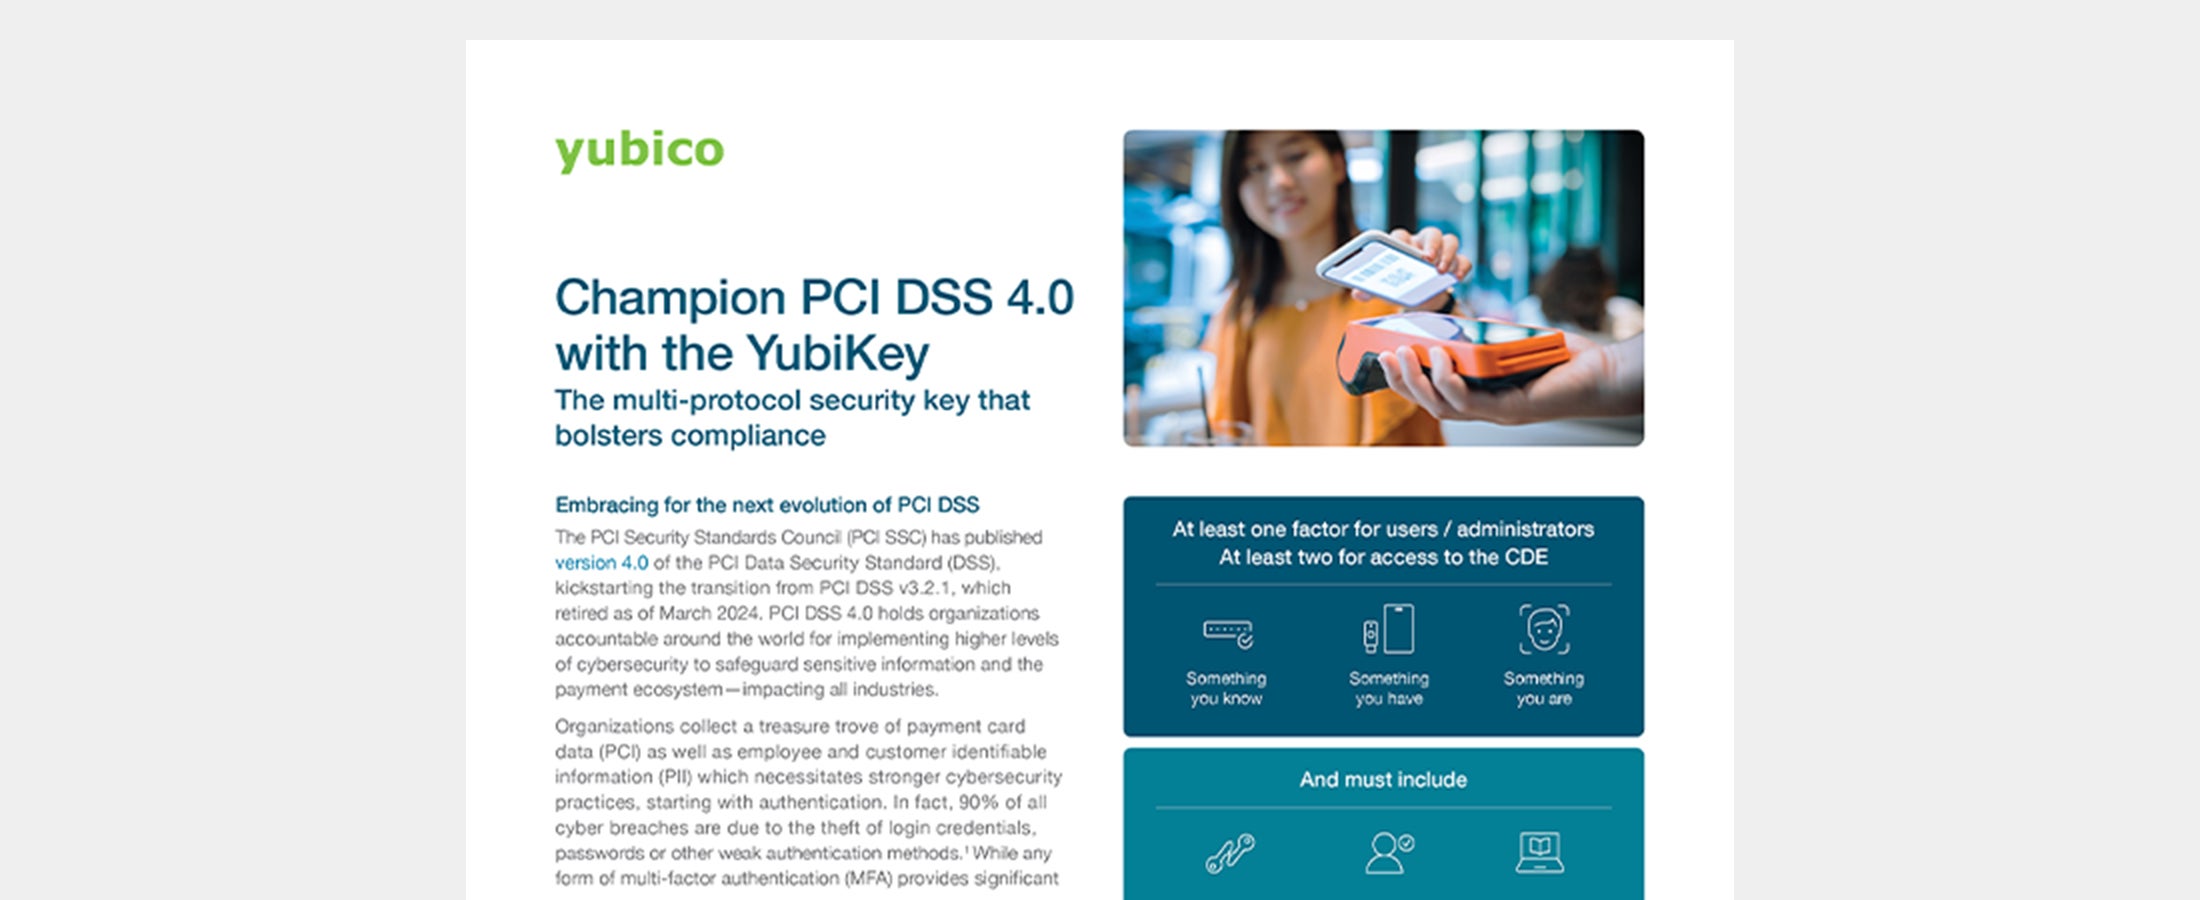 Champion PCI DSS 4.0 with the YubiKey solution brief cover image